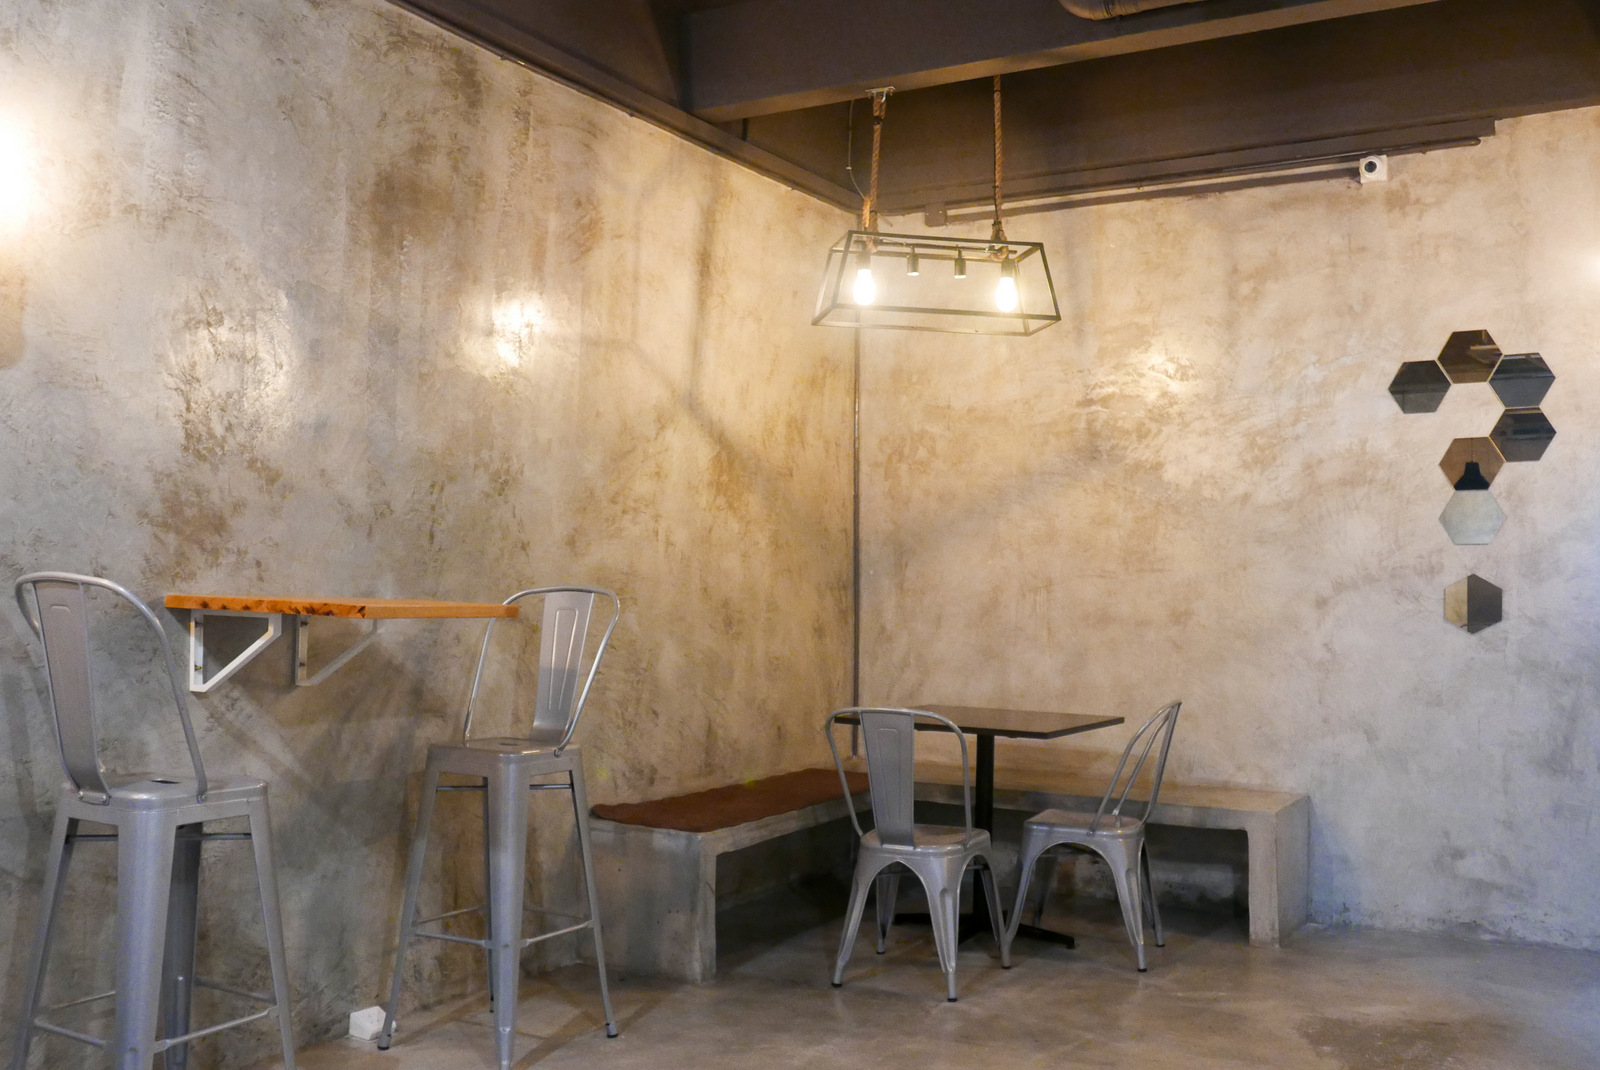 7. Oomph Cafe